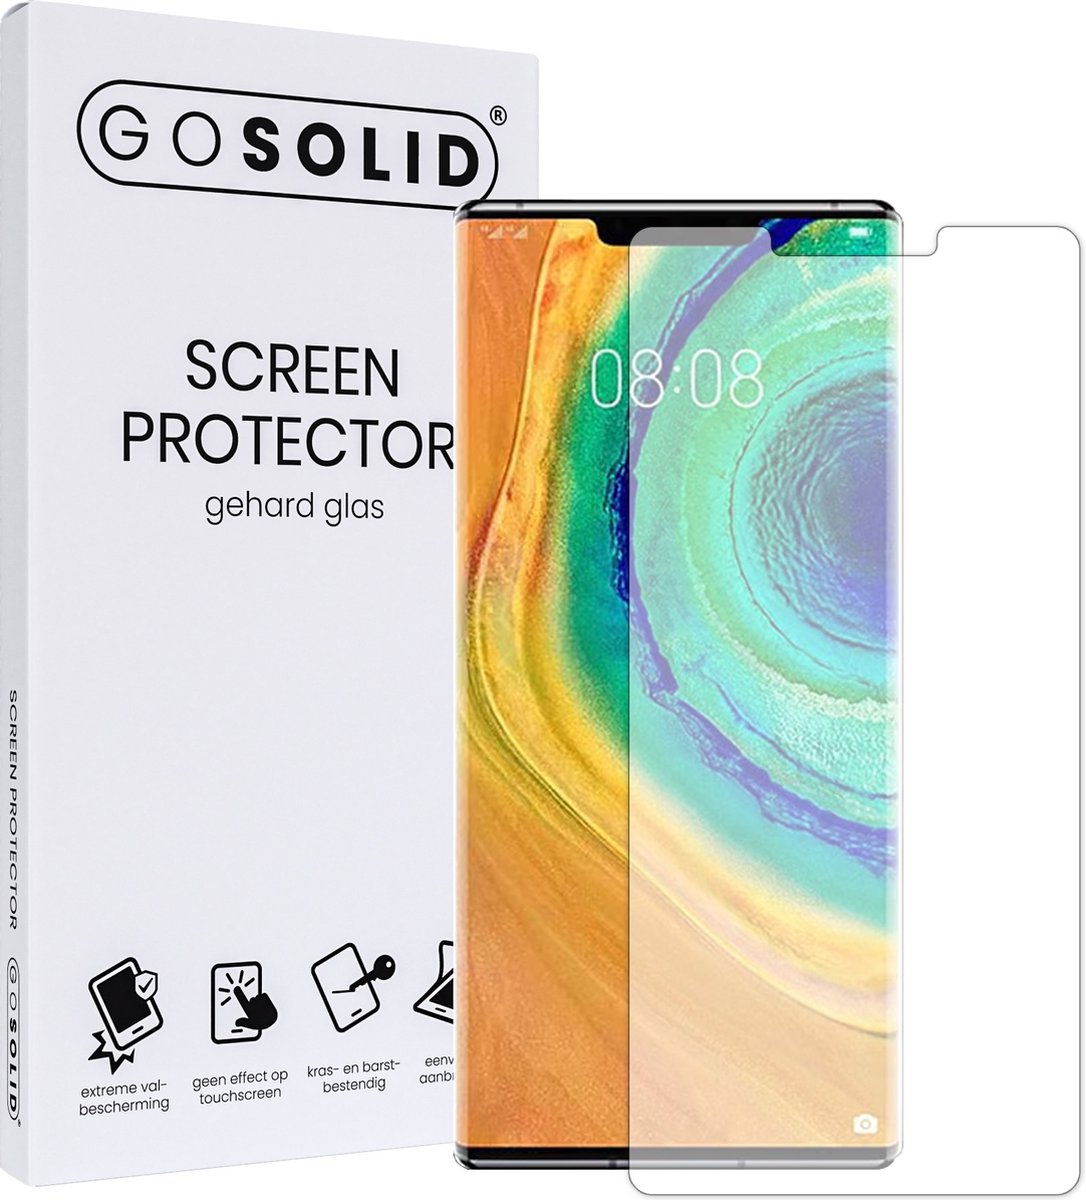 Go Solid! Screenprotector Voor Huawei Mate 30 Pro/mate 30 Pro 5g